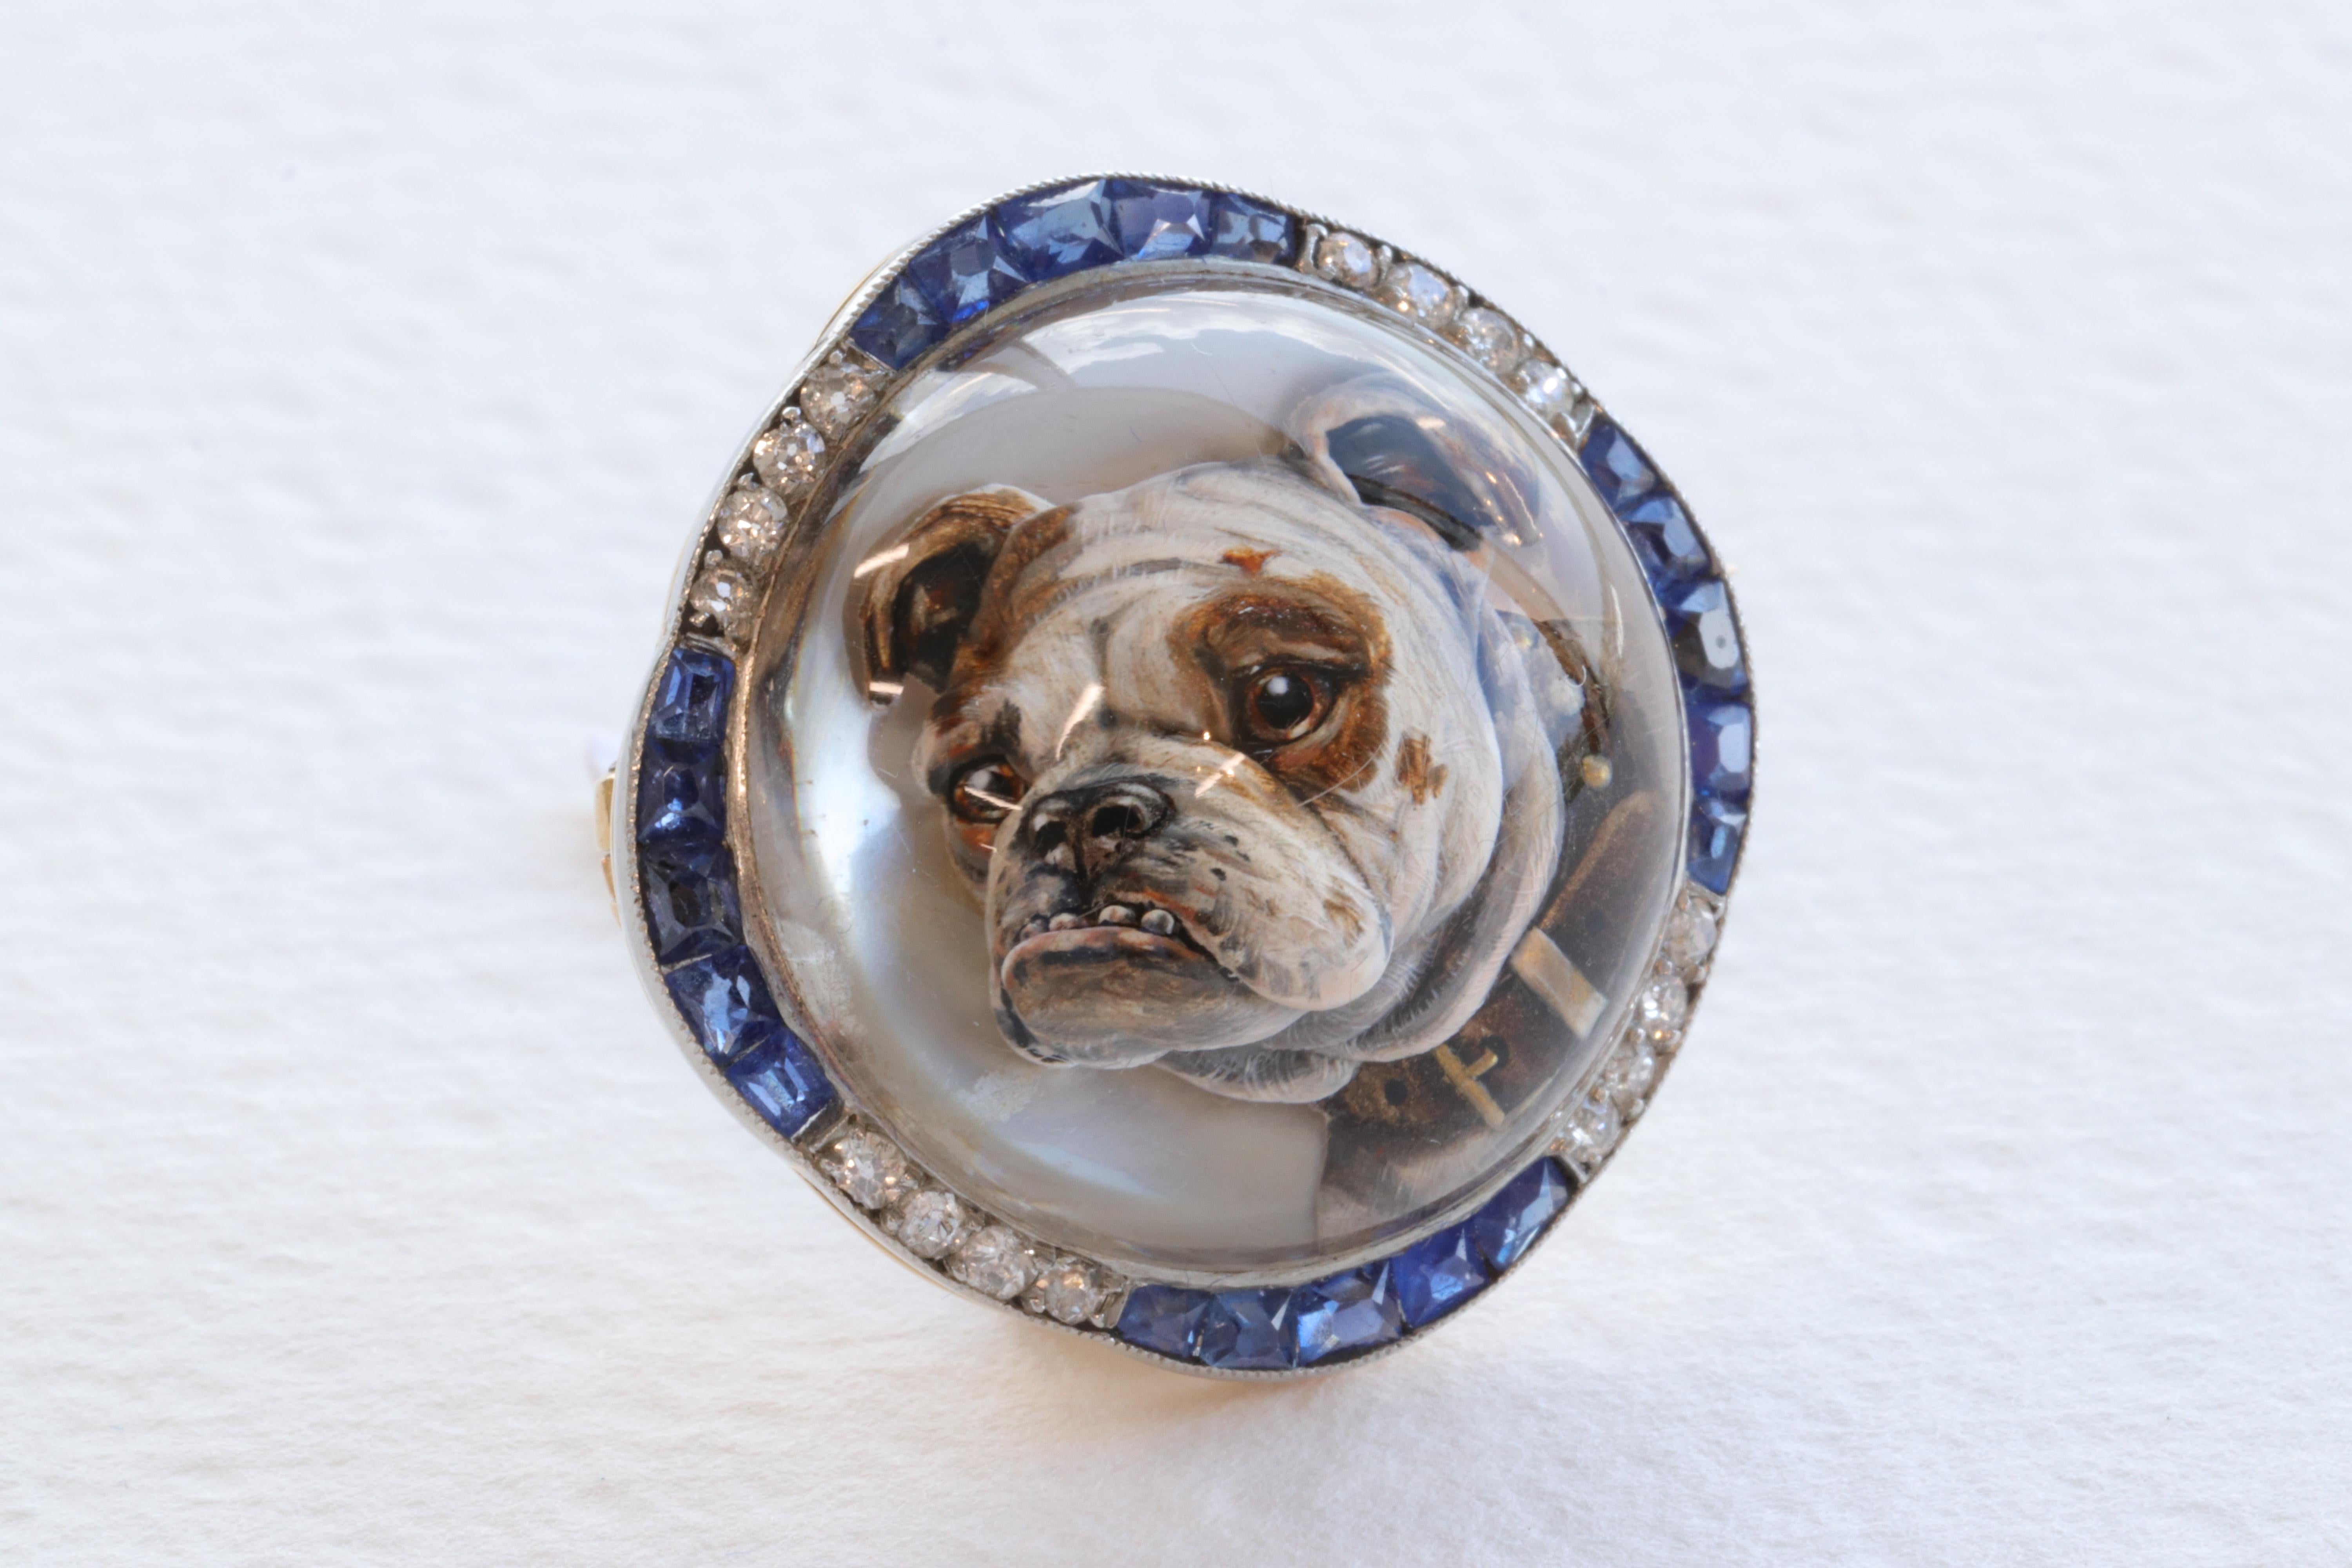 This exceptional Essex crystal brooch features a hyper realistic reverse intaglio of an English Bulldog hand carved into rock crystal and hand painted to perfection. The brooch is crafted of Platinum and 18 Karat Yellow Gold and set with old mine /